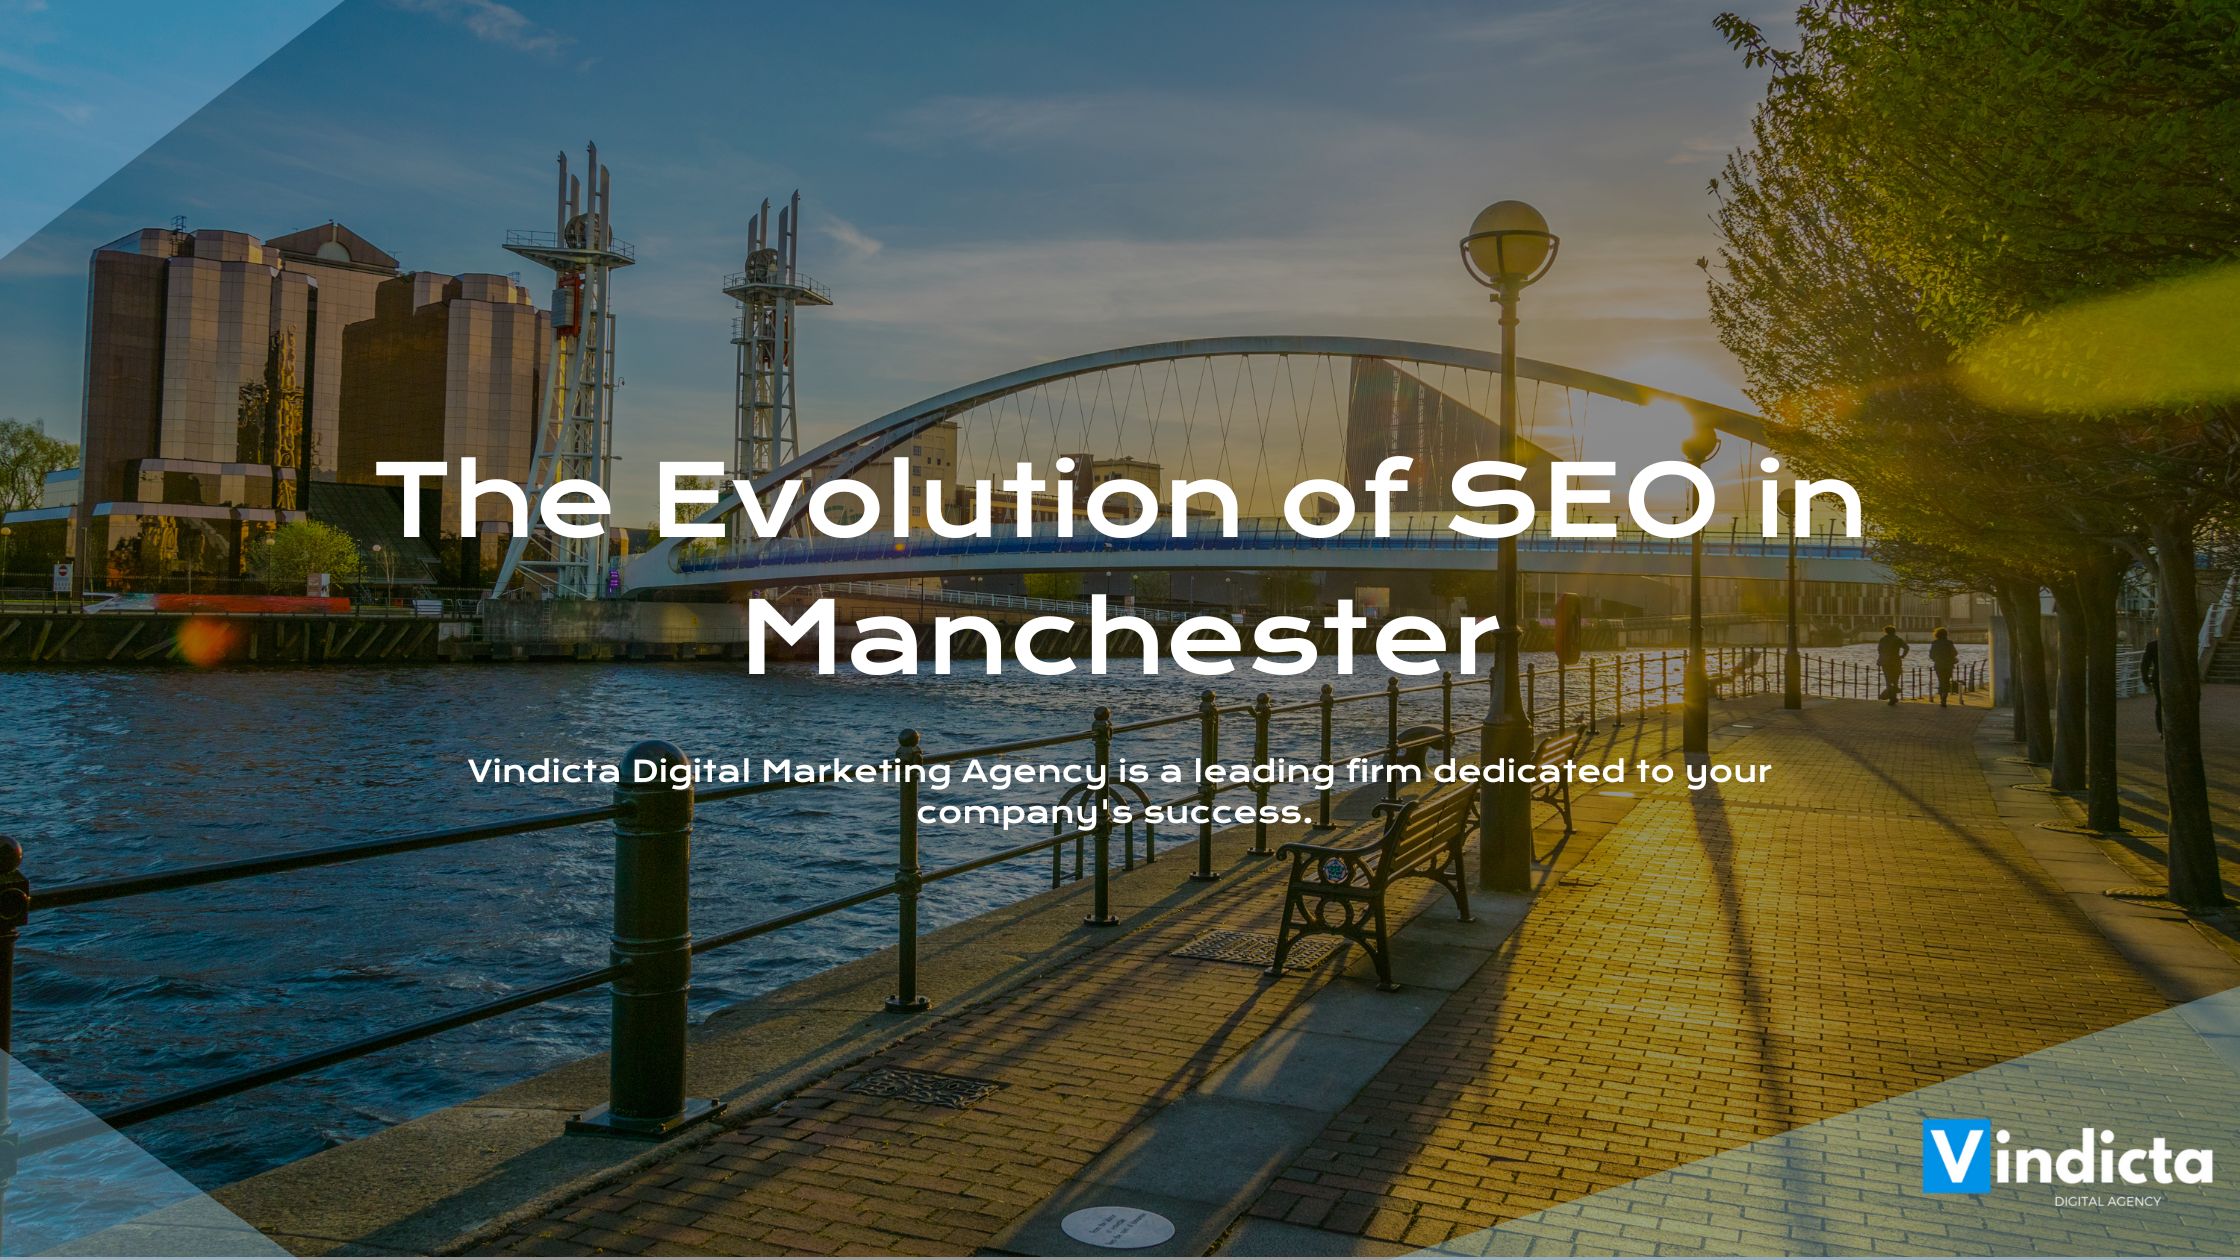 The Evolution of SEO Manchester: Digital Transformations